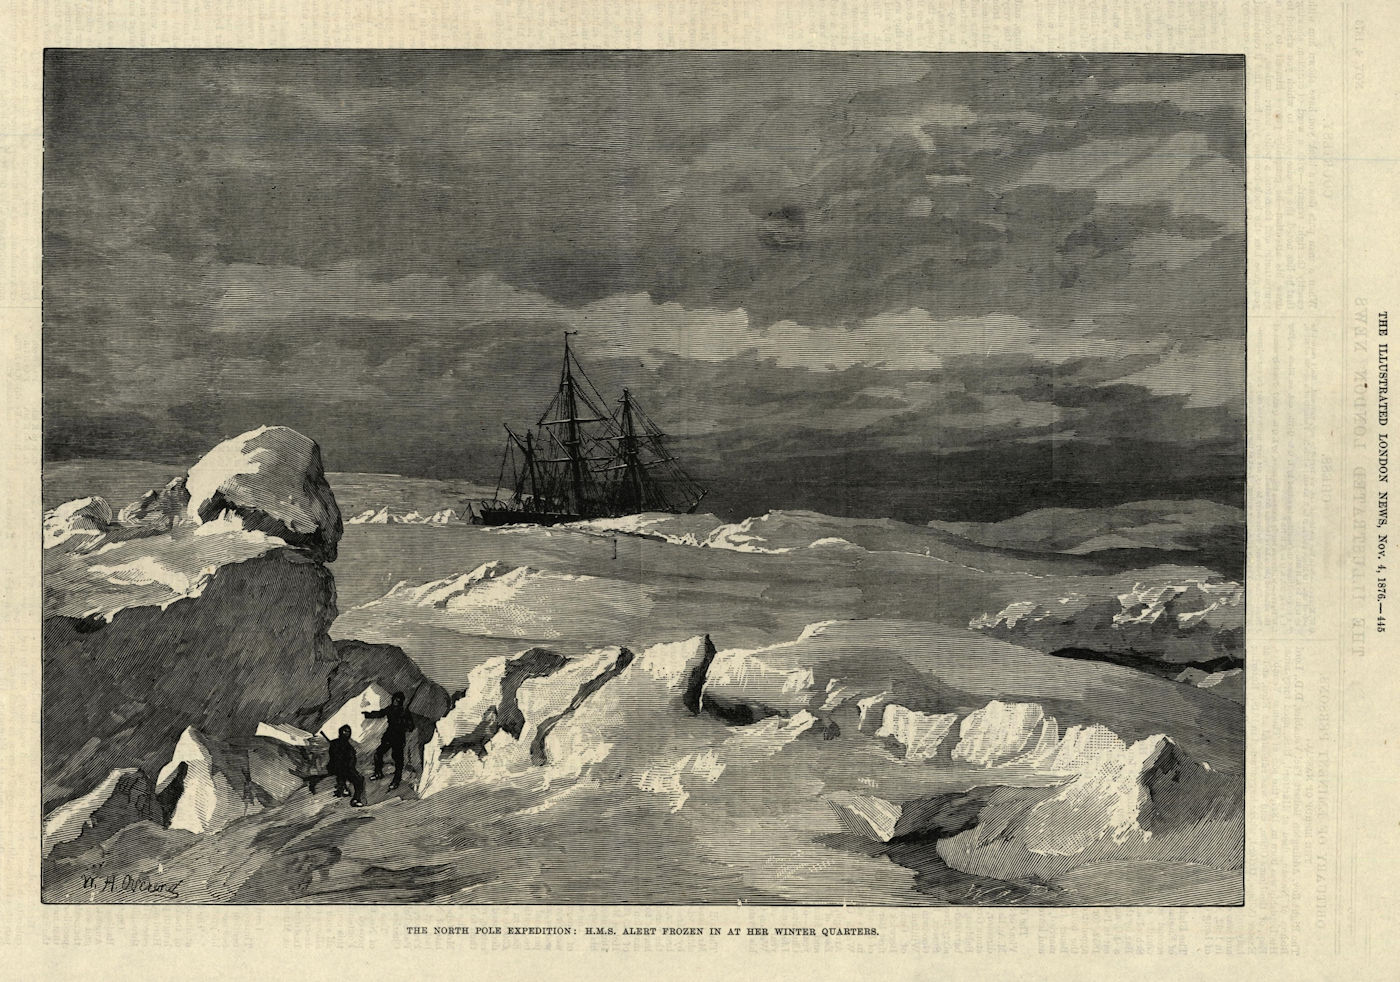 Associate Product North Pole expedition: HMS Alert frozen in her winter quarters. Arctic 1876